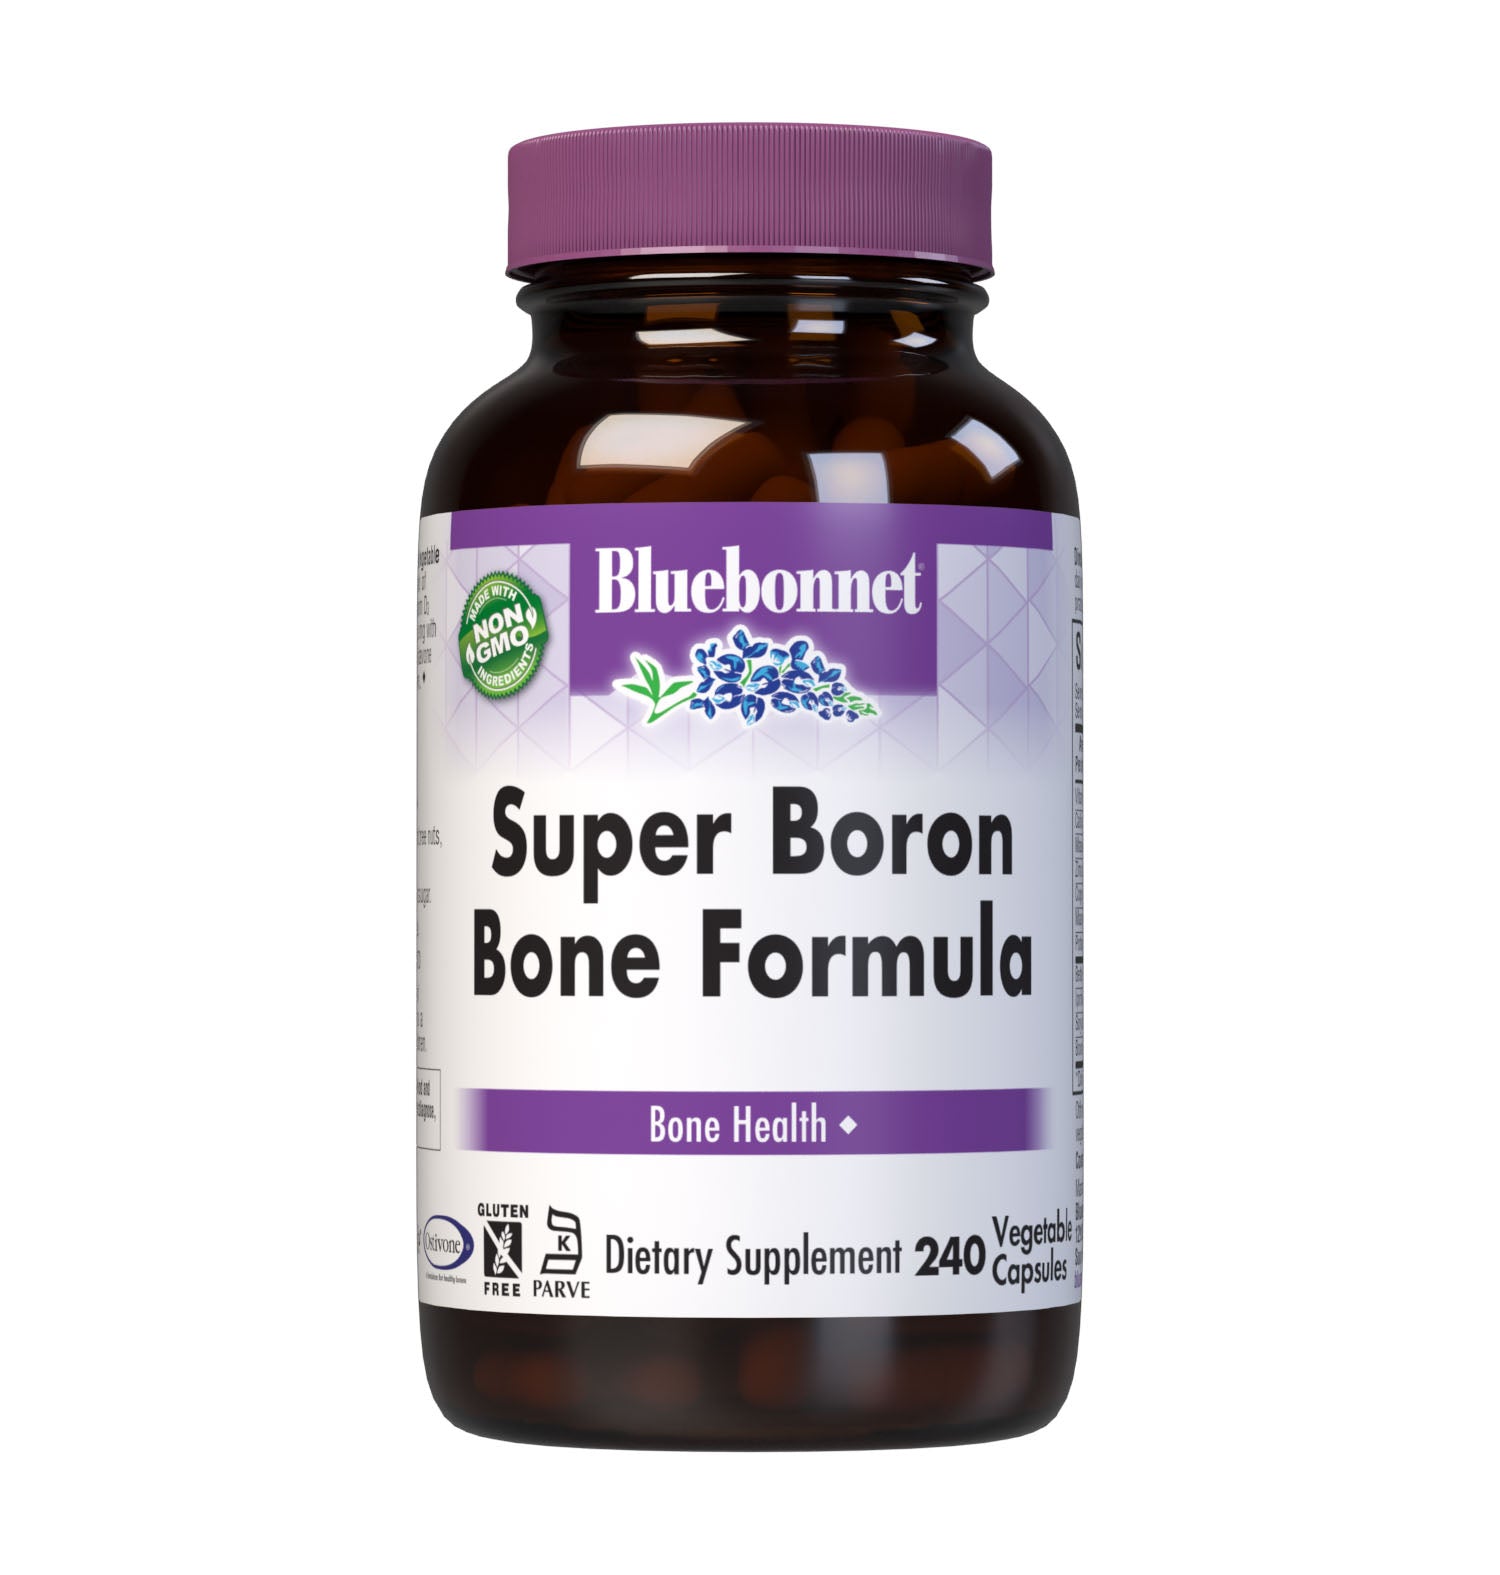 Bluebonnet’s Super Boron Bone Formula 240 Vegetable Capsules are formulated with a special blend of calcium, magnesium, potassium, zinc, vitamin D3 and the trace minerals copper. Also formulated with at supplies the soy isoflavones Genistein, Genistein, Daidzein, Daidzin, Glycitein and Glycitin. #size_240 count